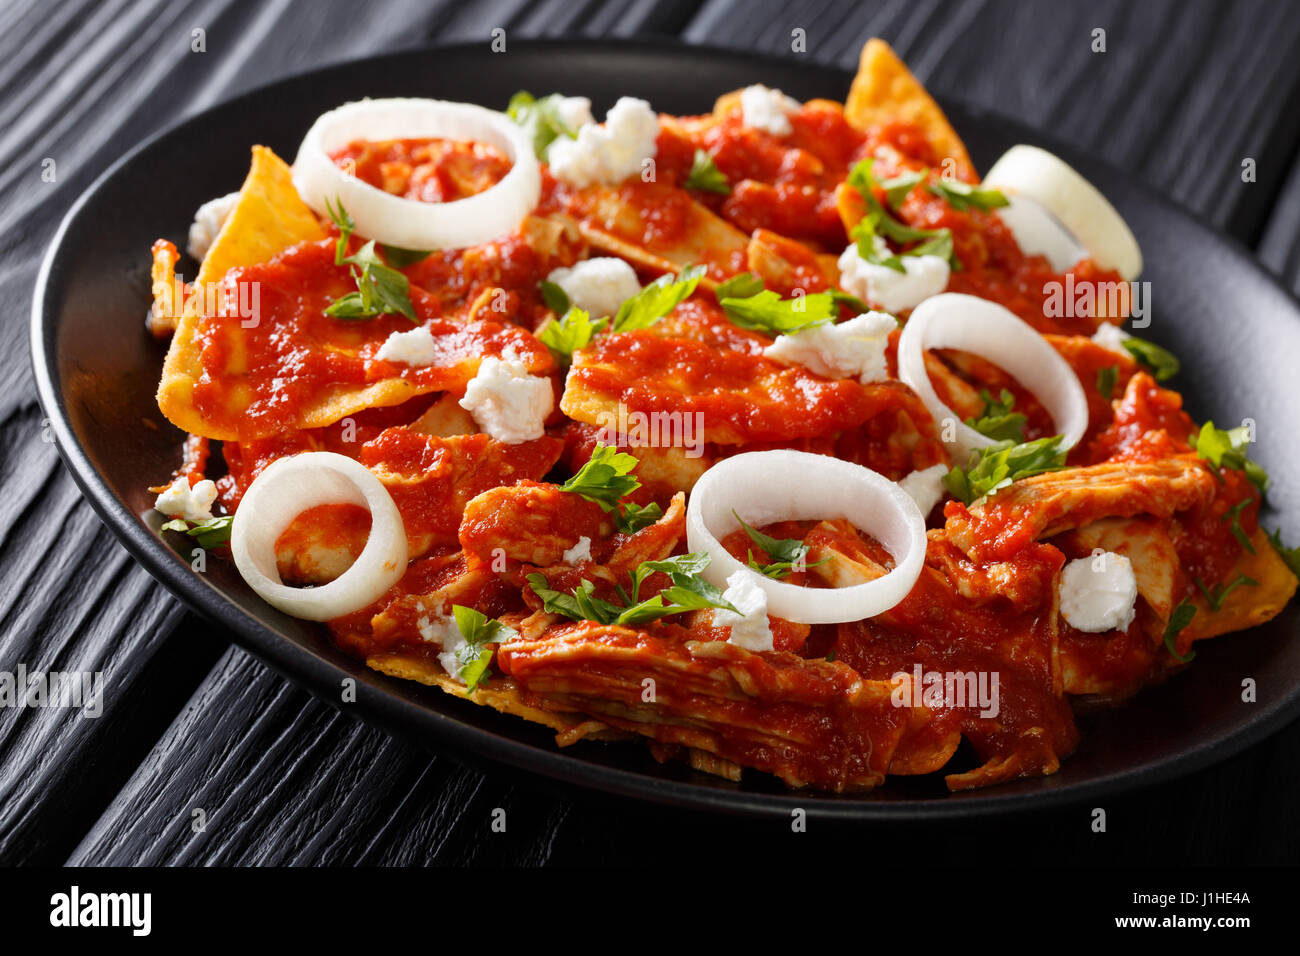 Mexican food fried tortillas with chicken and tomato salsa closeup on a plate on a table. horizontal Stock Photo